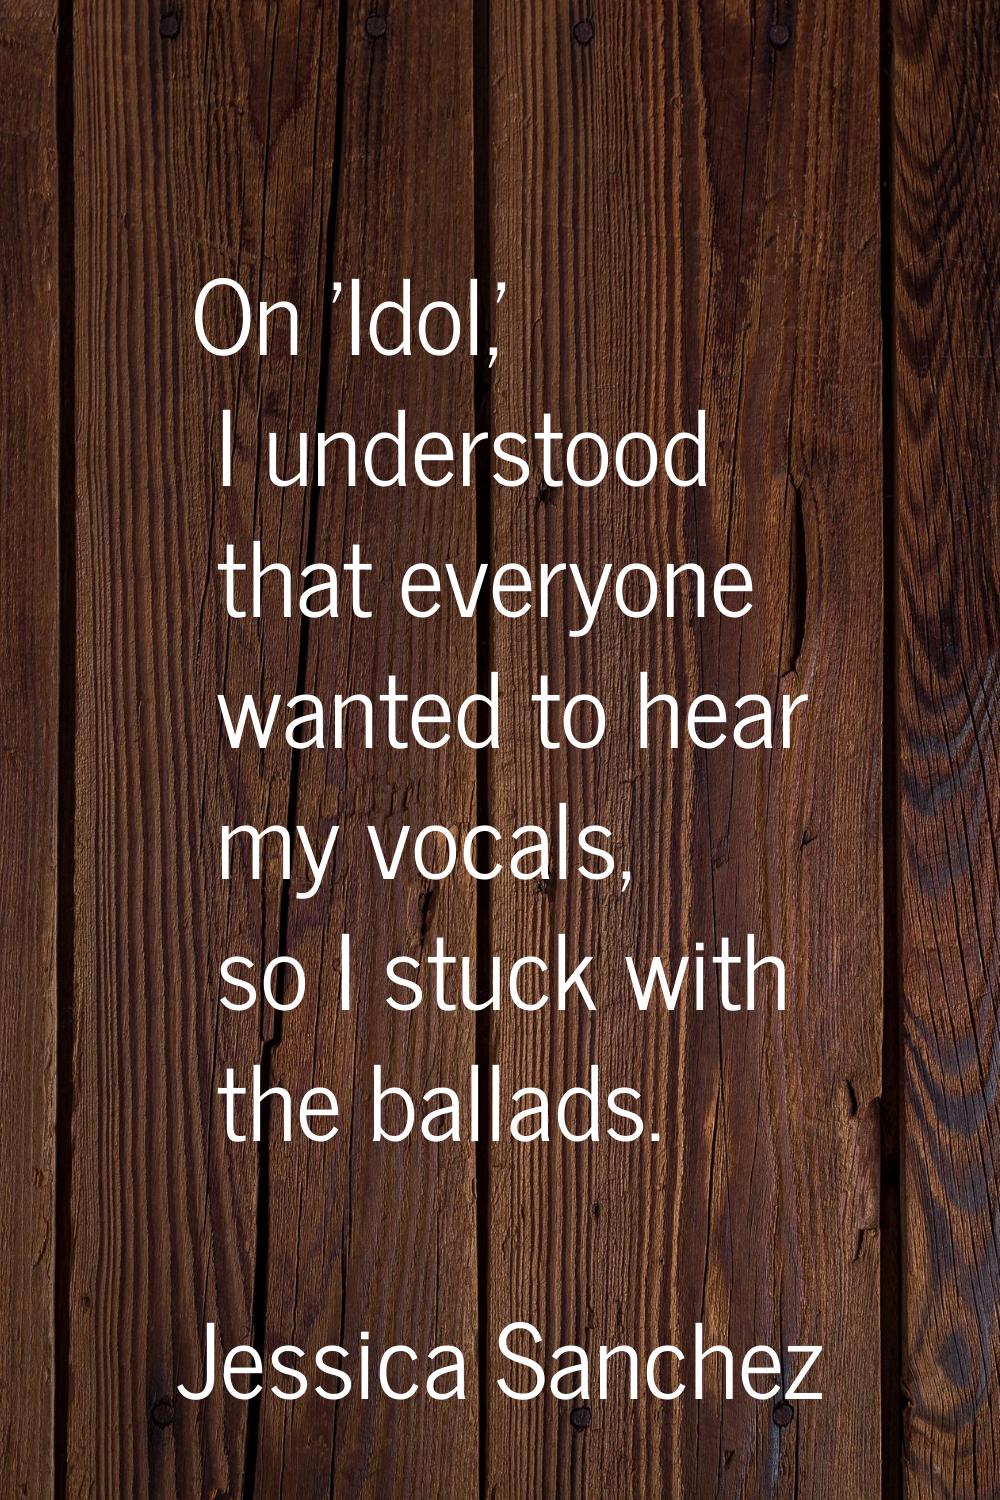 On 'Idol,' I understood that everyone wanted to hear my vocals, so I stuck with the ballads.